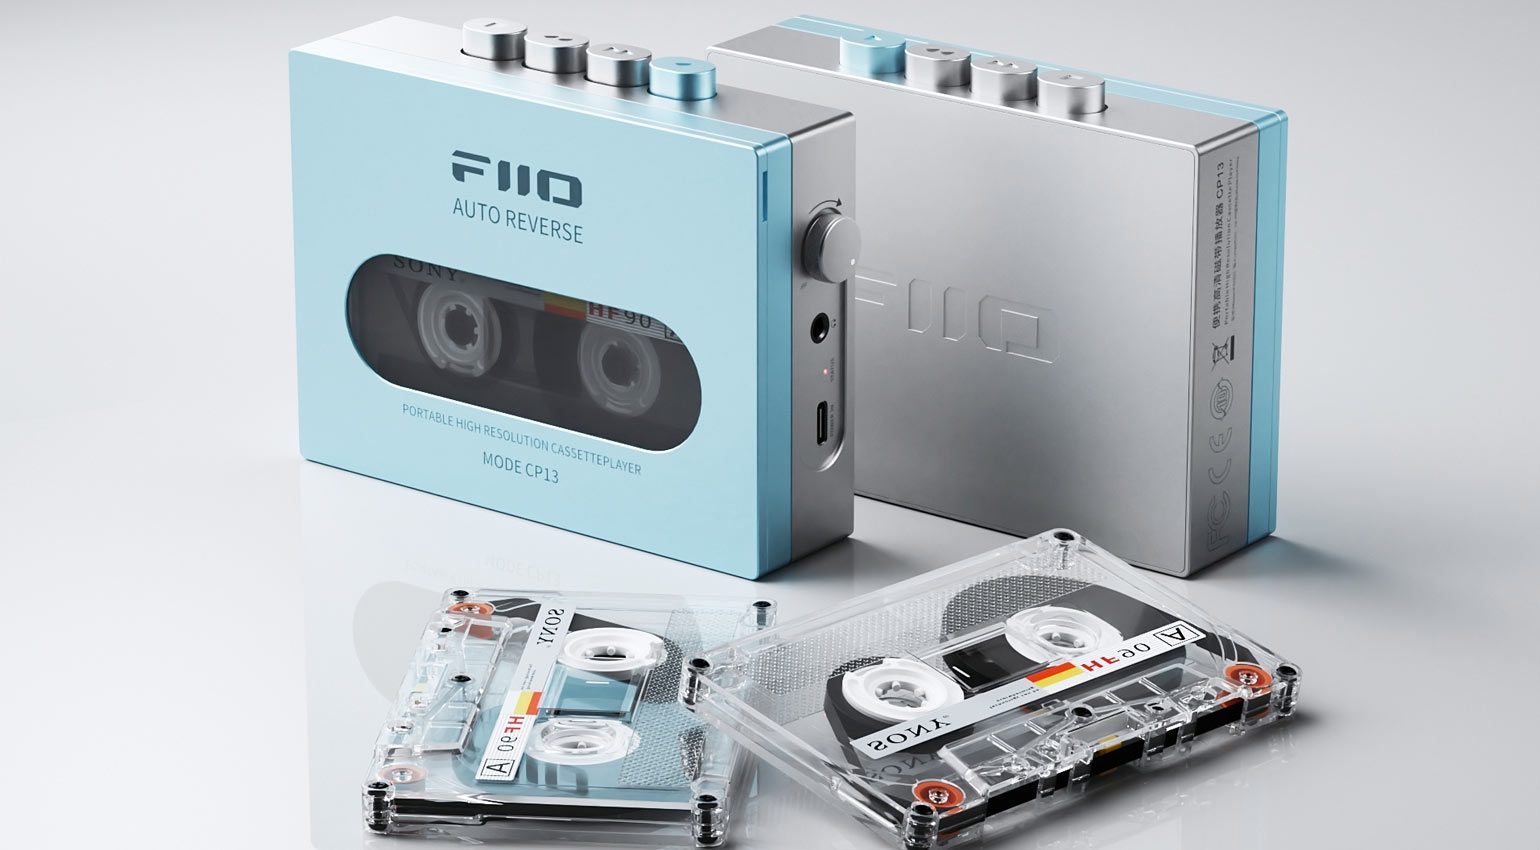 Back in the loop: why cassette tapes became fashionable again, Cassette  tape